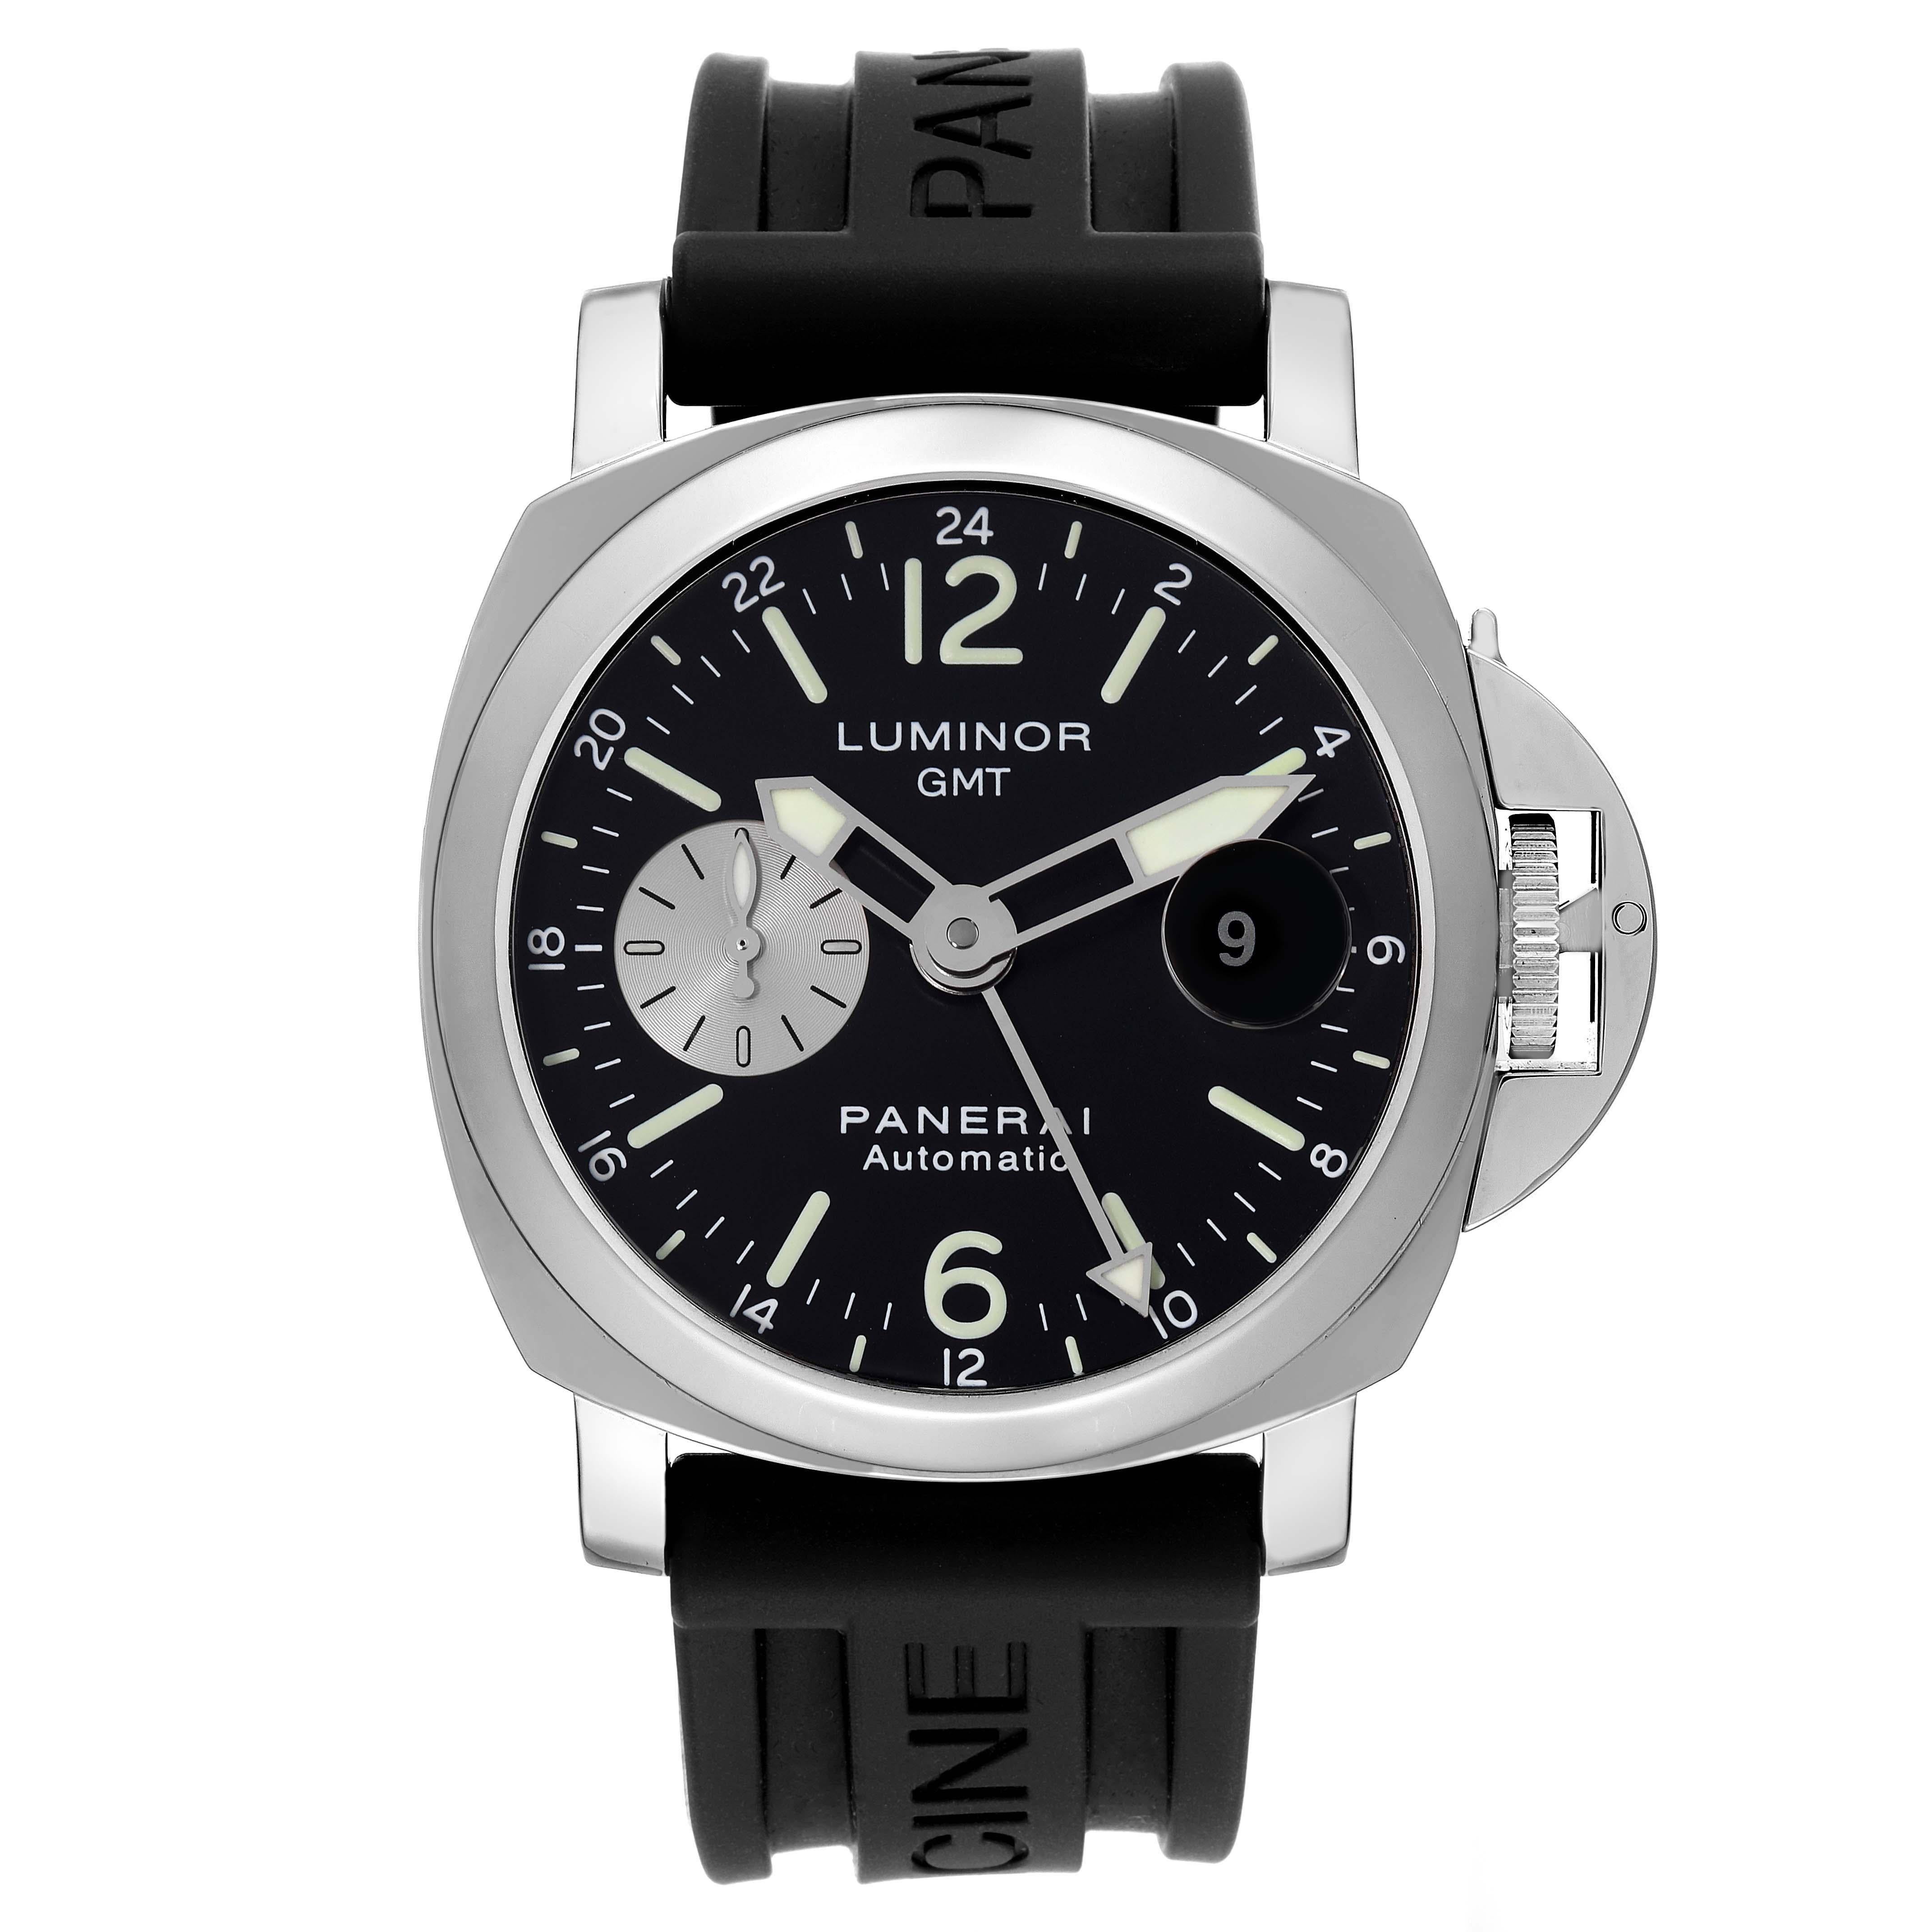 Panerai Luminor GMT Automatic Steel Mens Watch PAM00088. Automatic self-winding movement. GMT function. Two part, polished and brushed cushion shaped stainless steel case 44.0 mm in diameter. Polished Panerai patented crown protector. Stainless